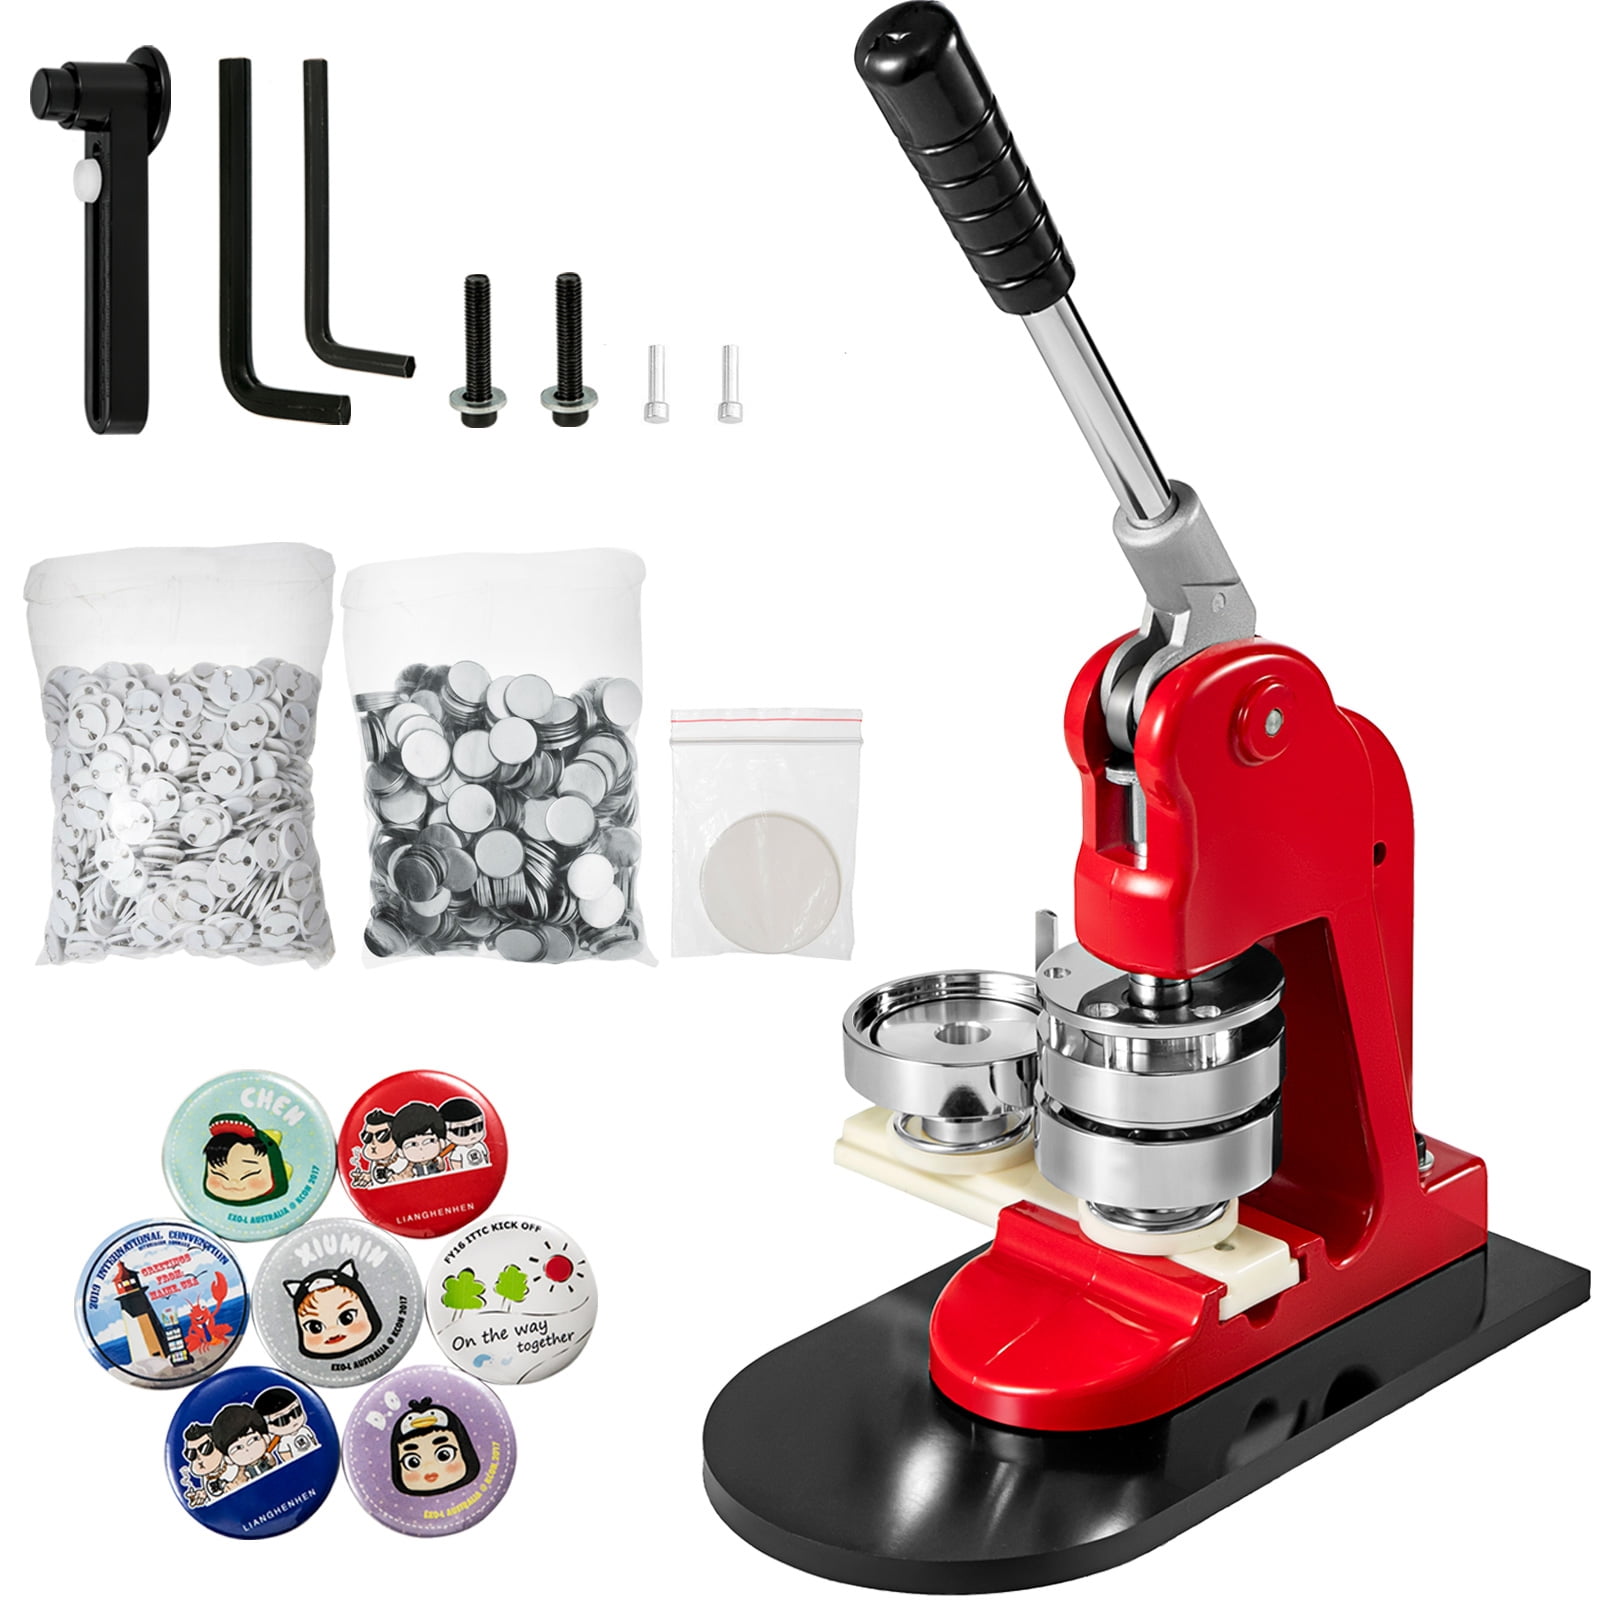 VEVOR Vevorbrand Button Maker Machine 25mm 1 inch Button Maker Machine 1000pcs Button Badge Maker Aluminum Frame Free Button Parts and Circle Cutter, Red